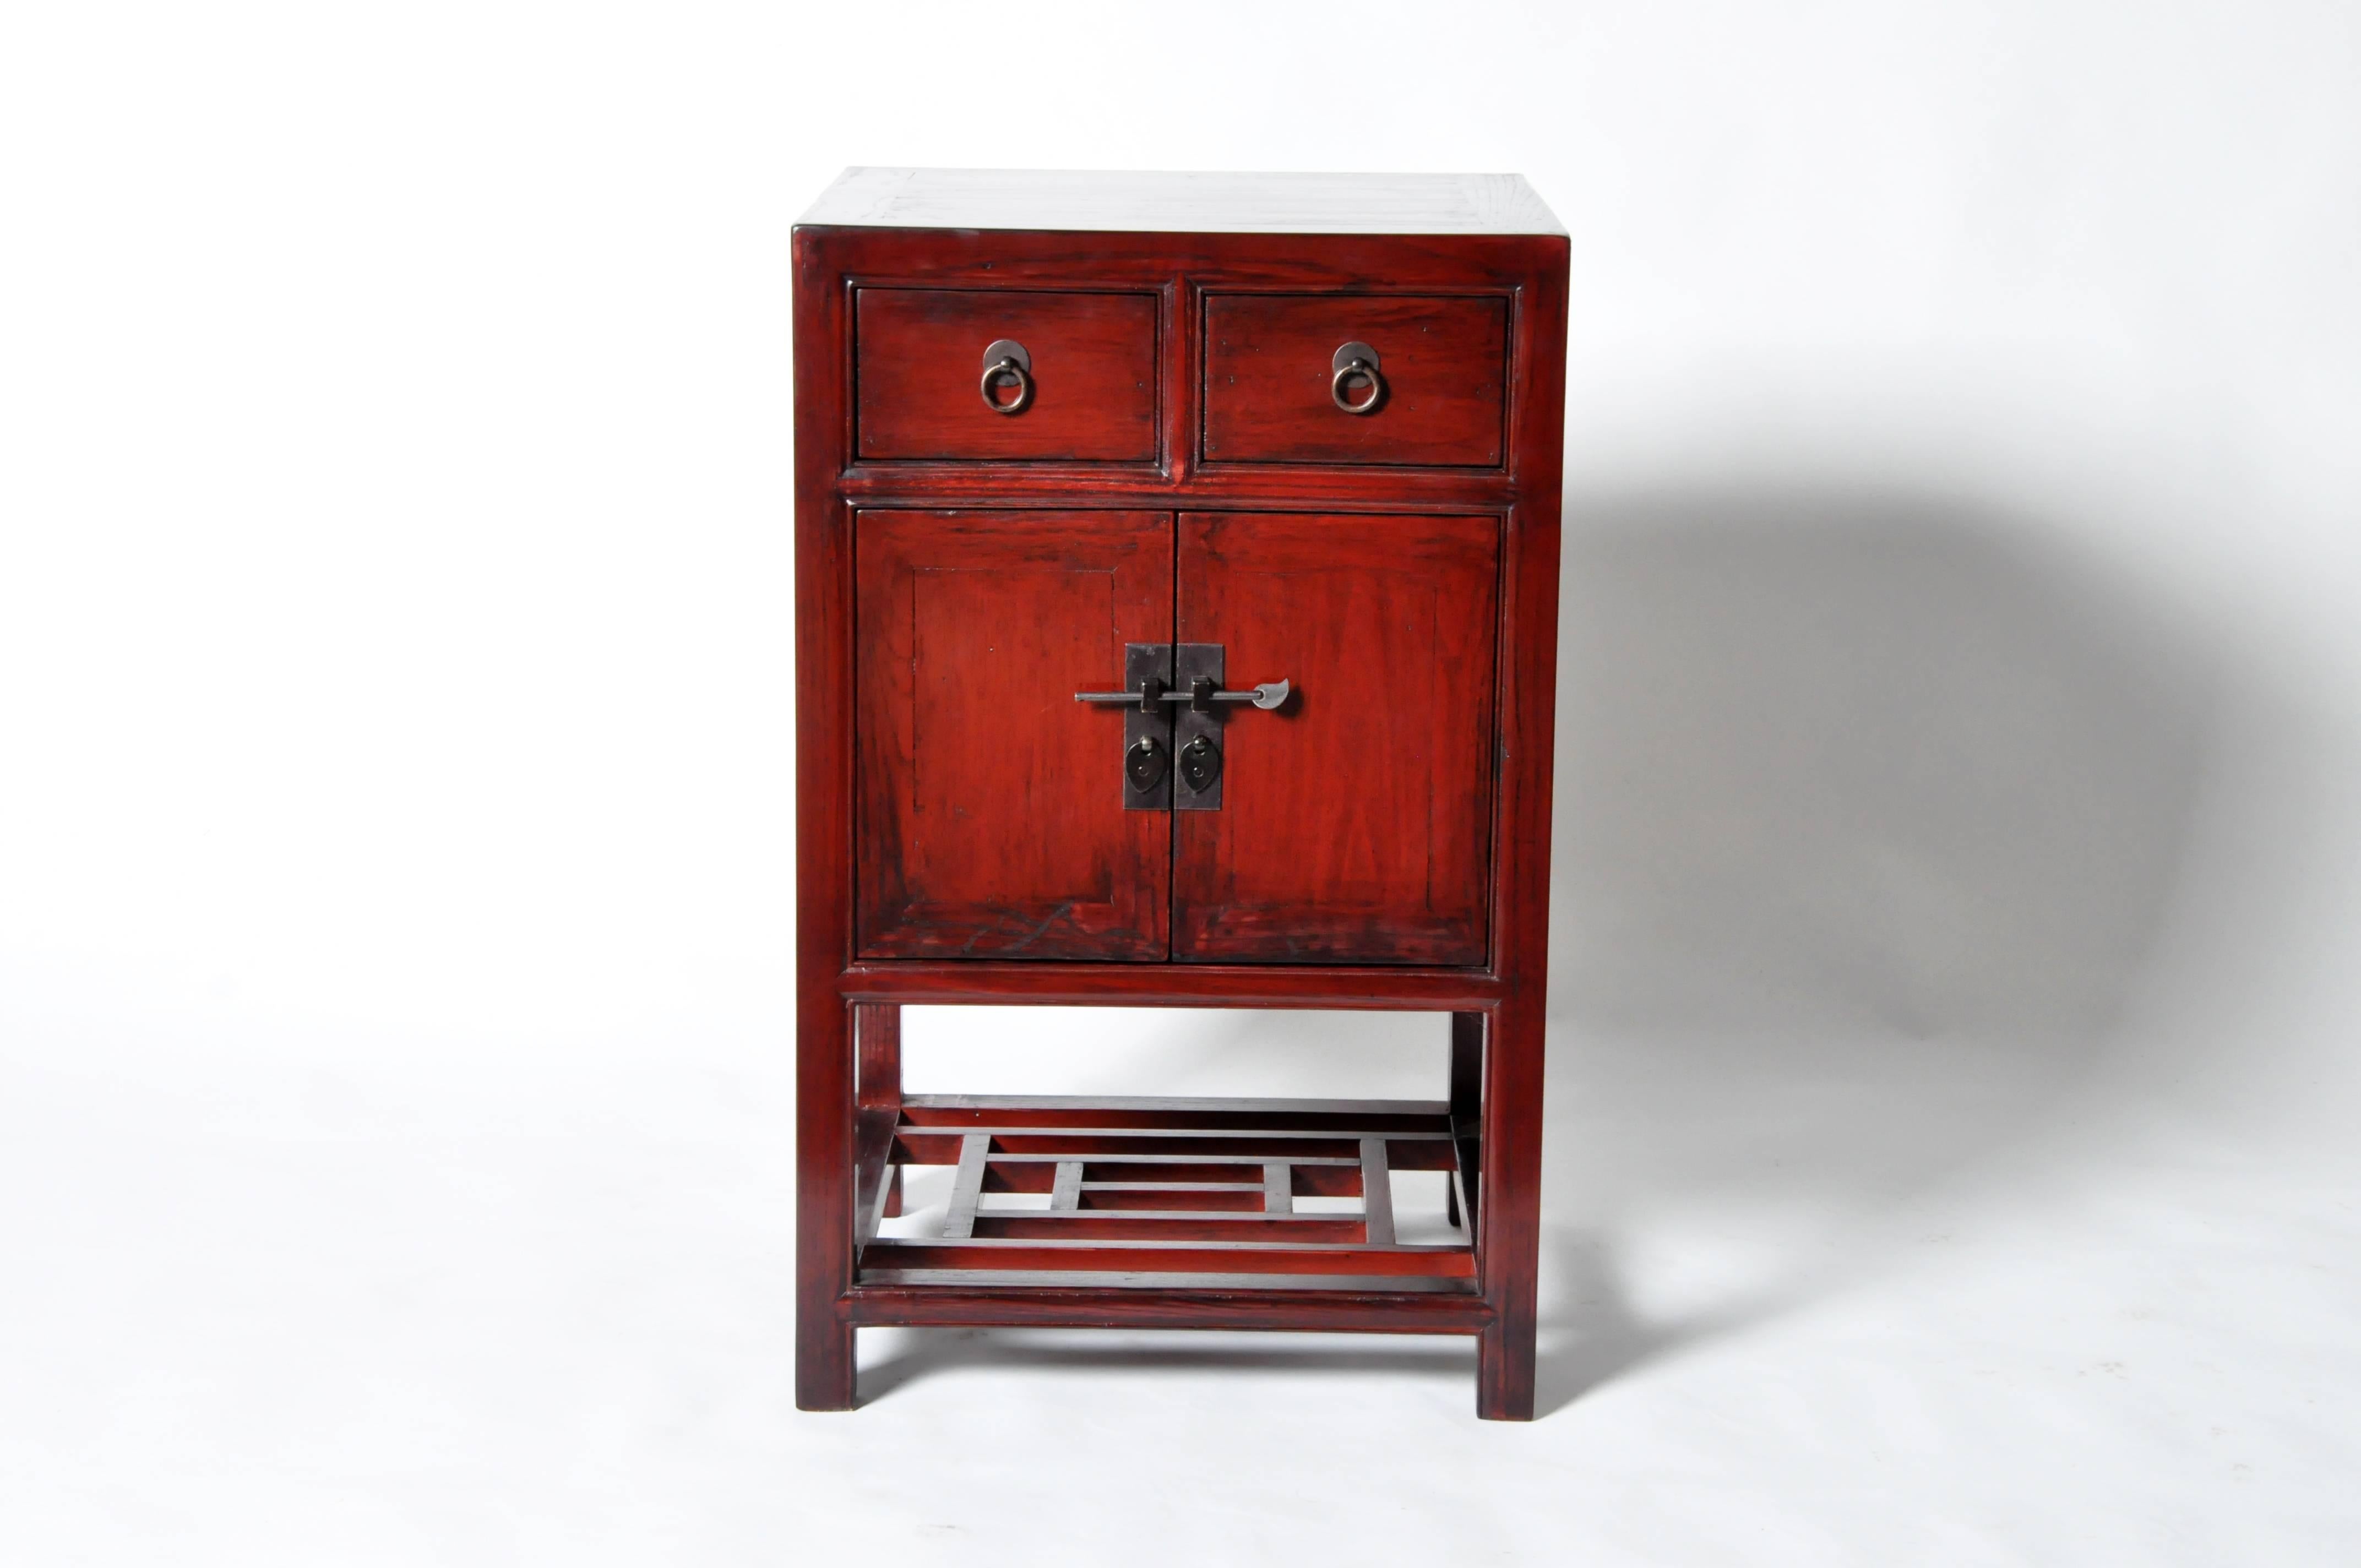 This Chinese side chest is made from red lacquered elmwood and has been fully restored. It features two drawers and a shelf for storage.